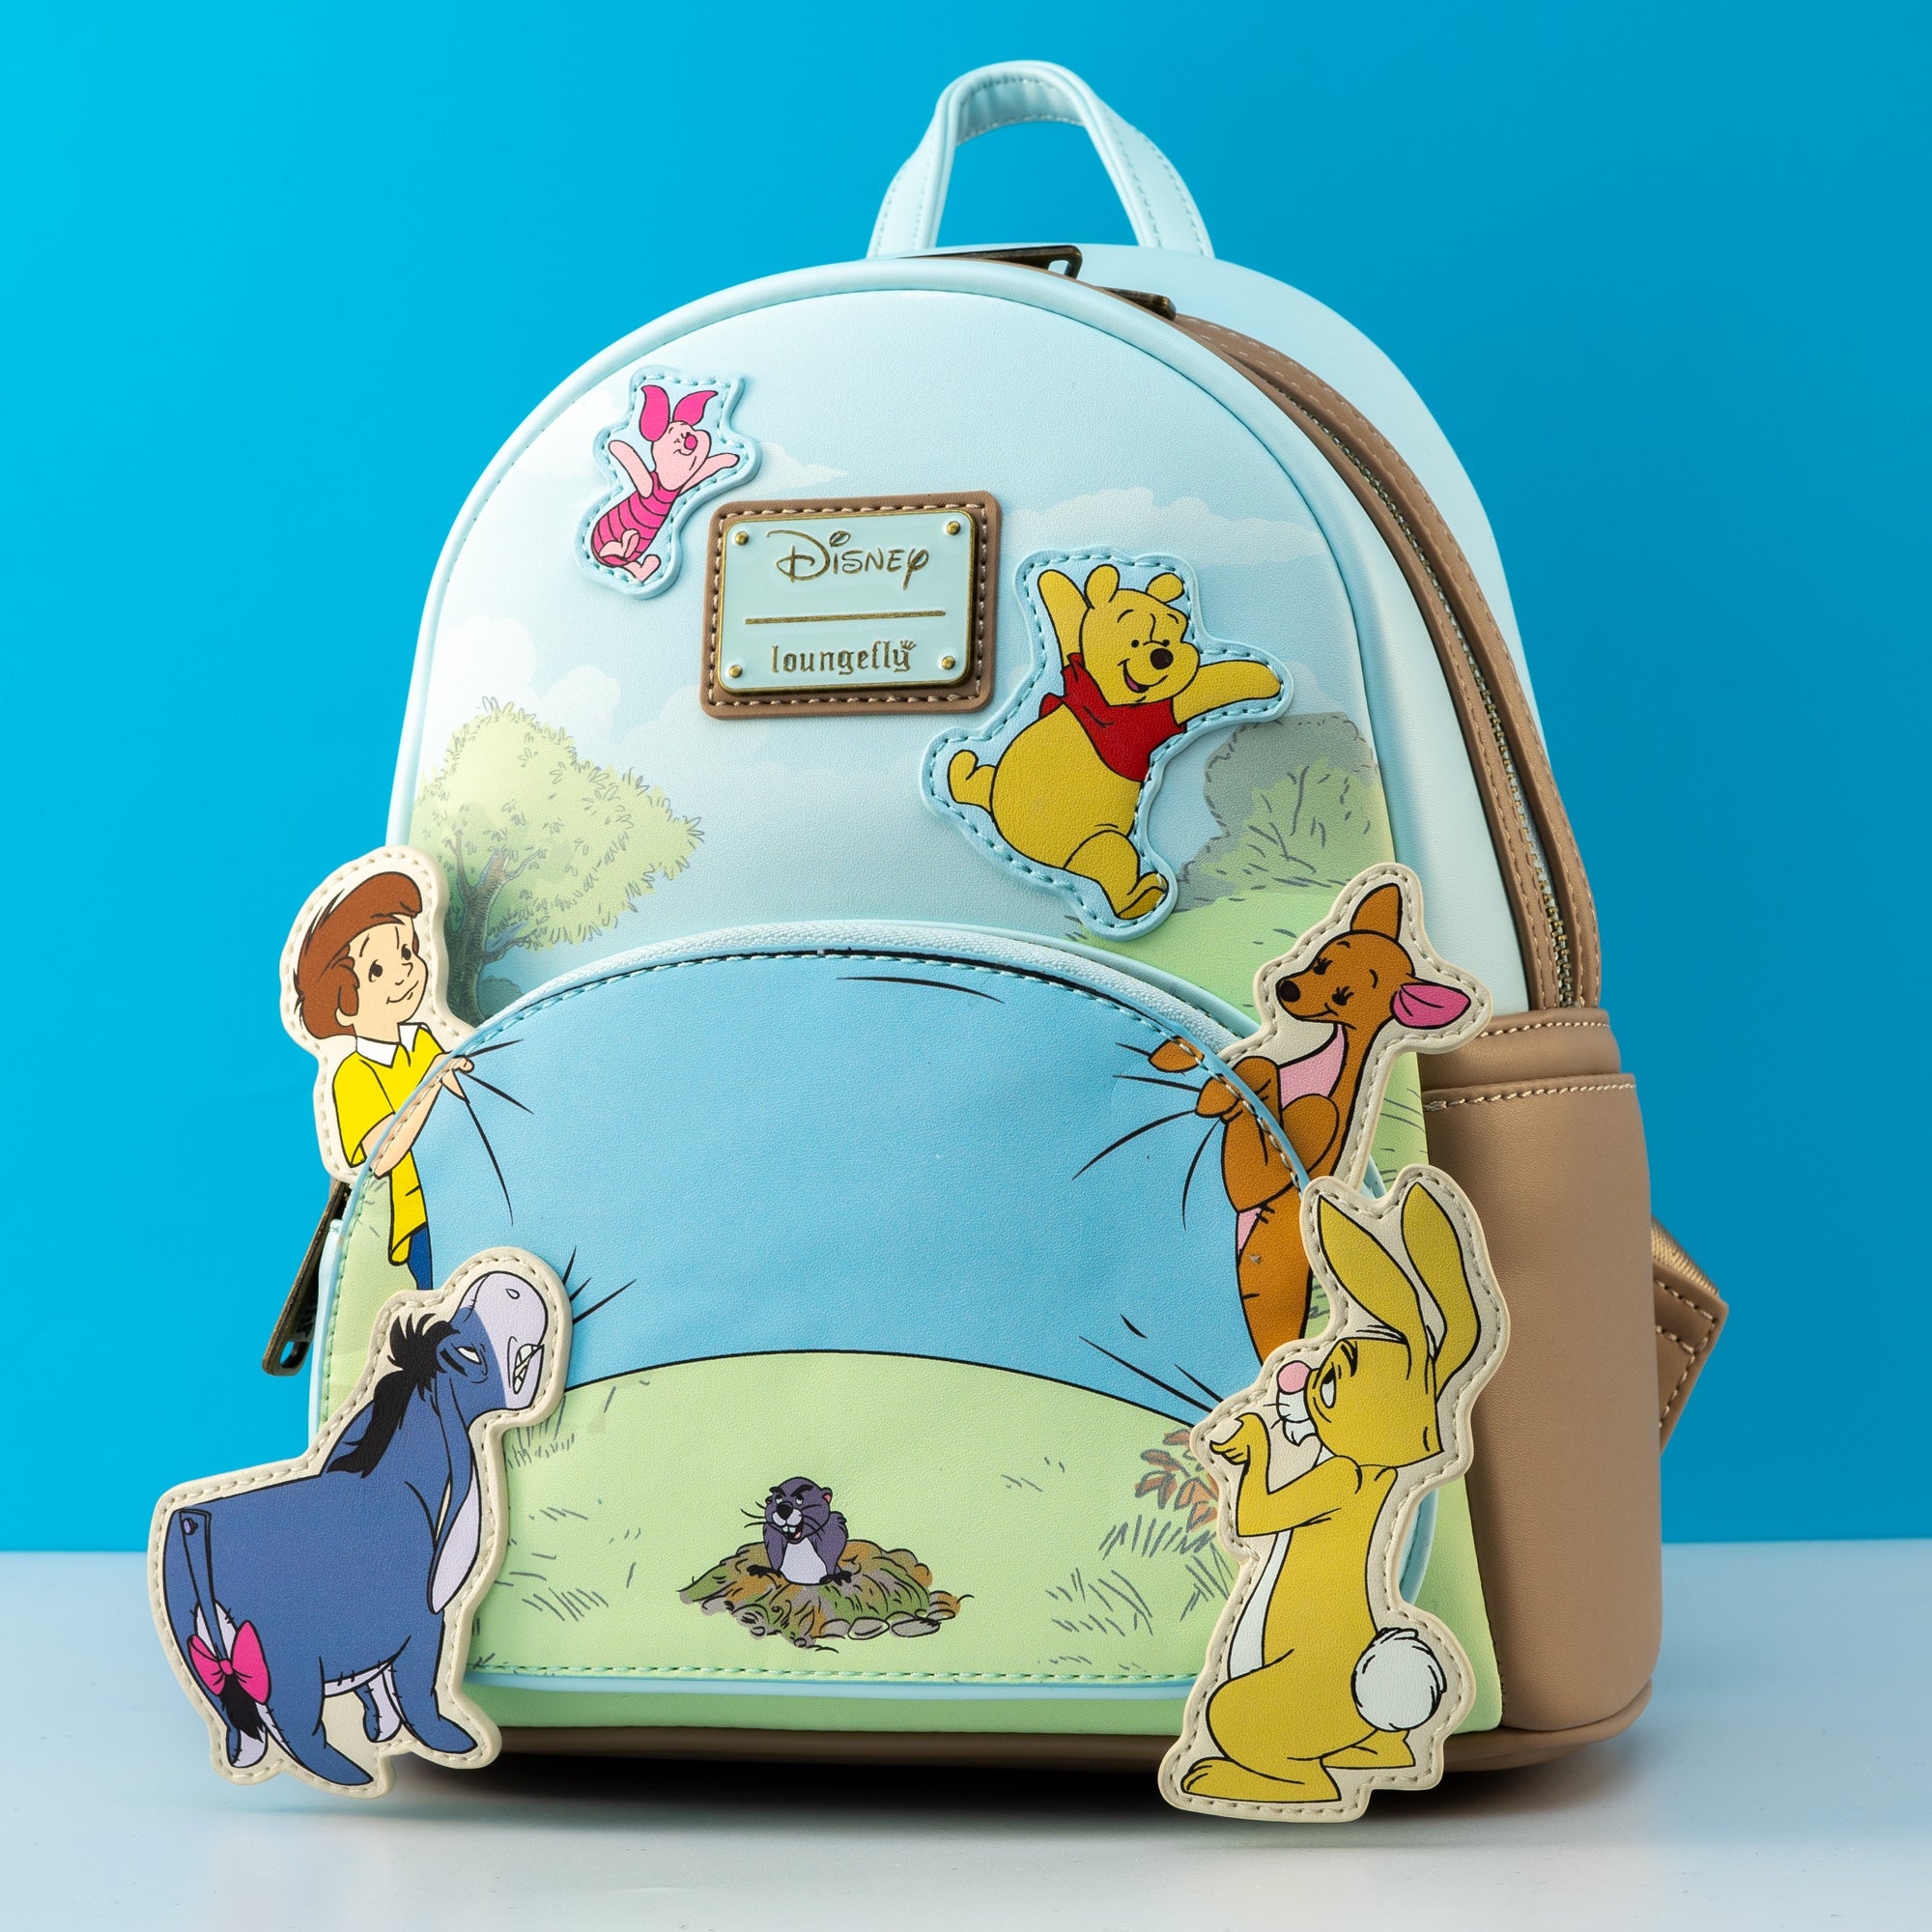 Loungefly x Disney Winnie the Pooh Jumping For Joy Mini Backpack